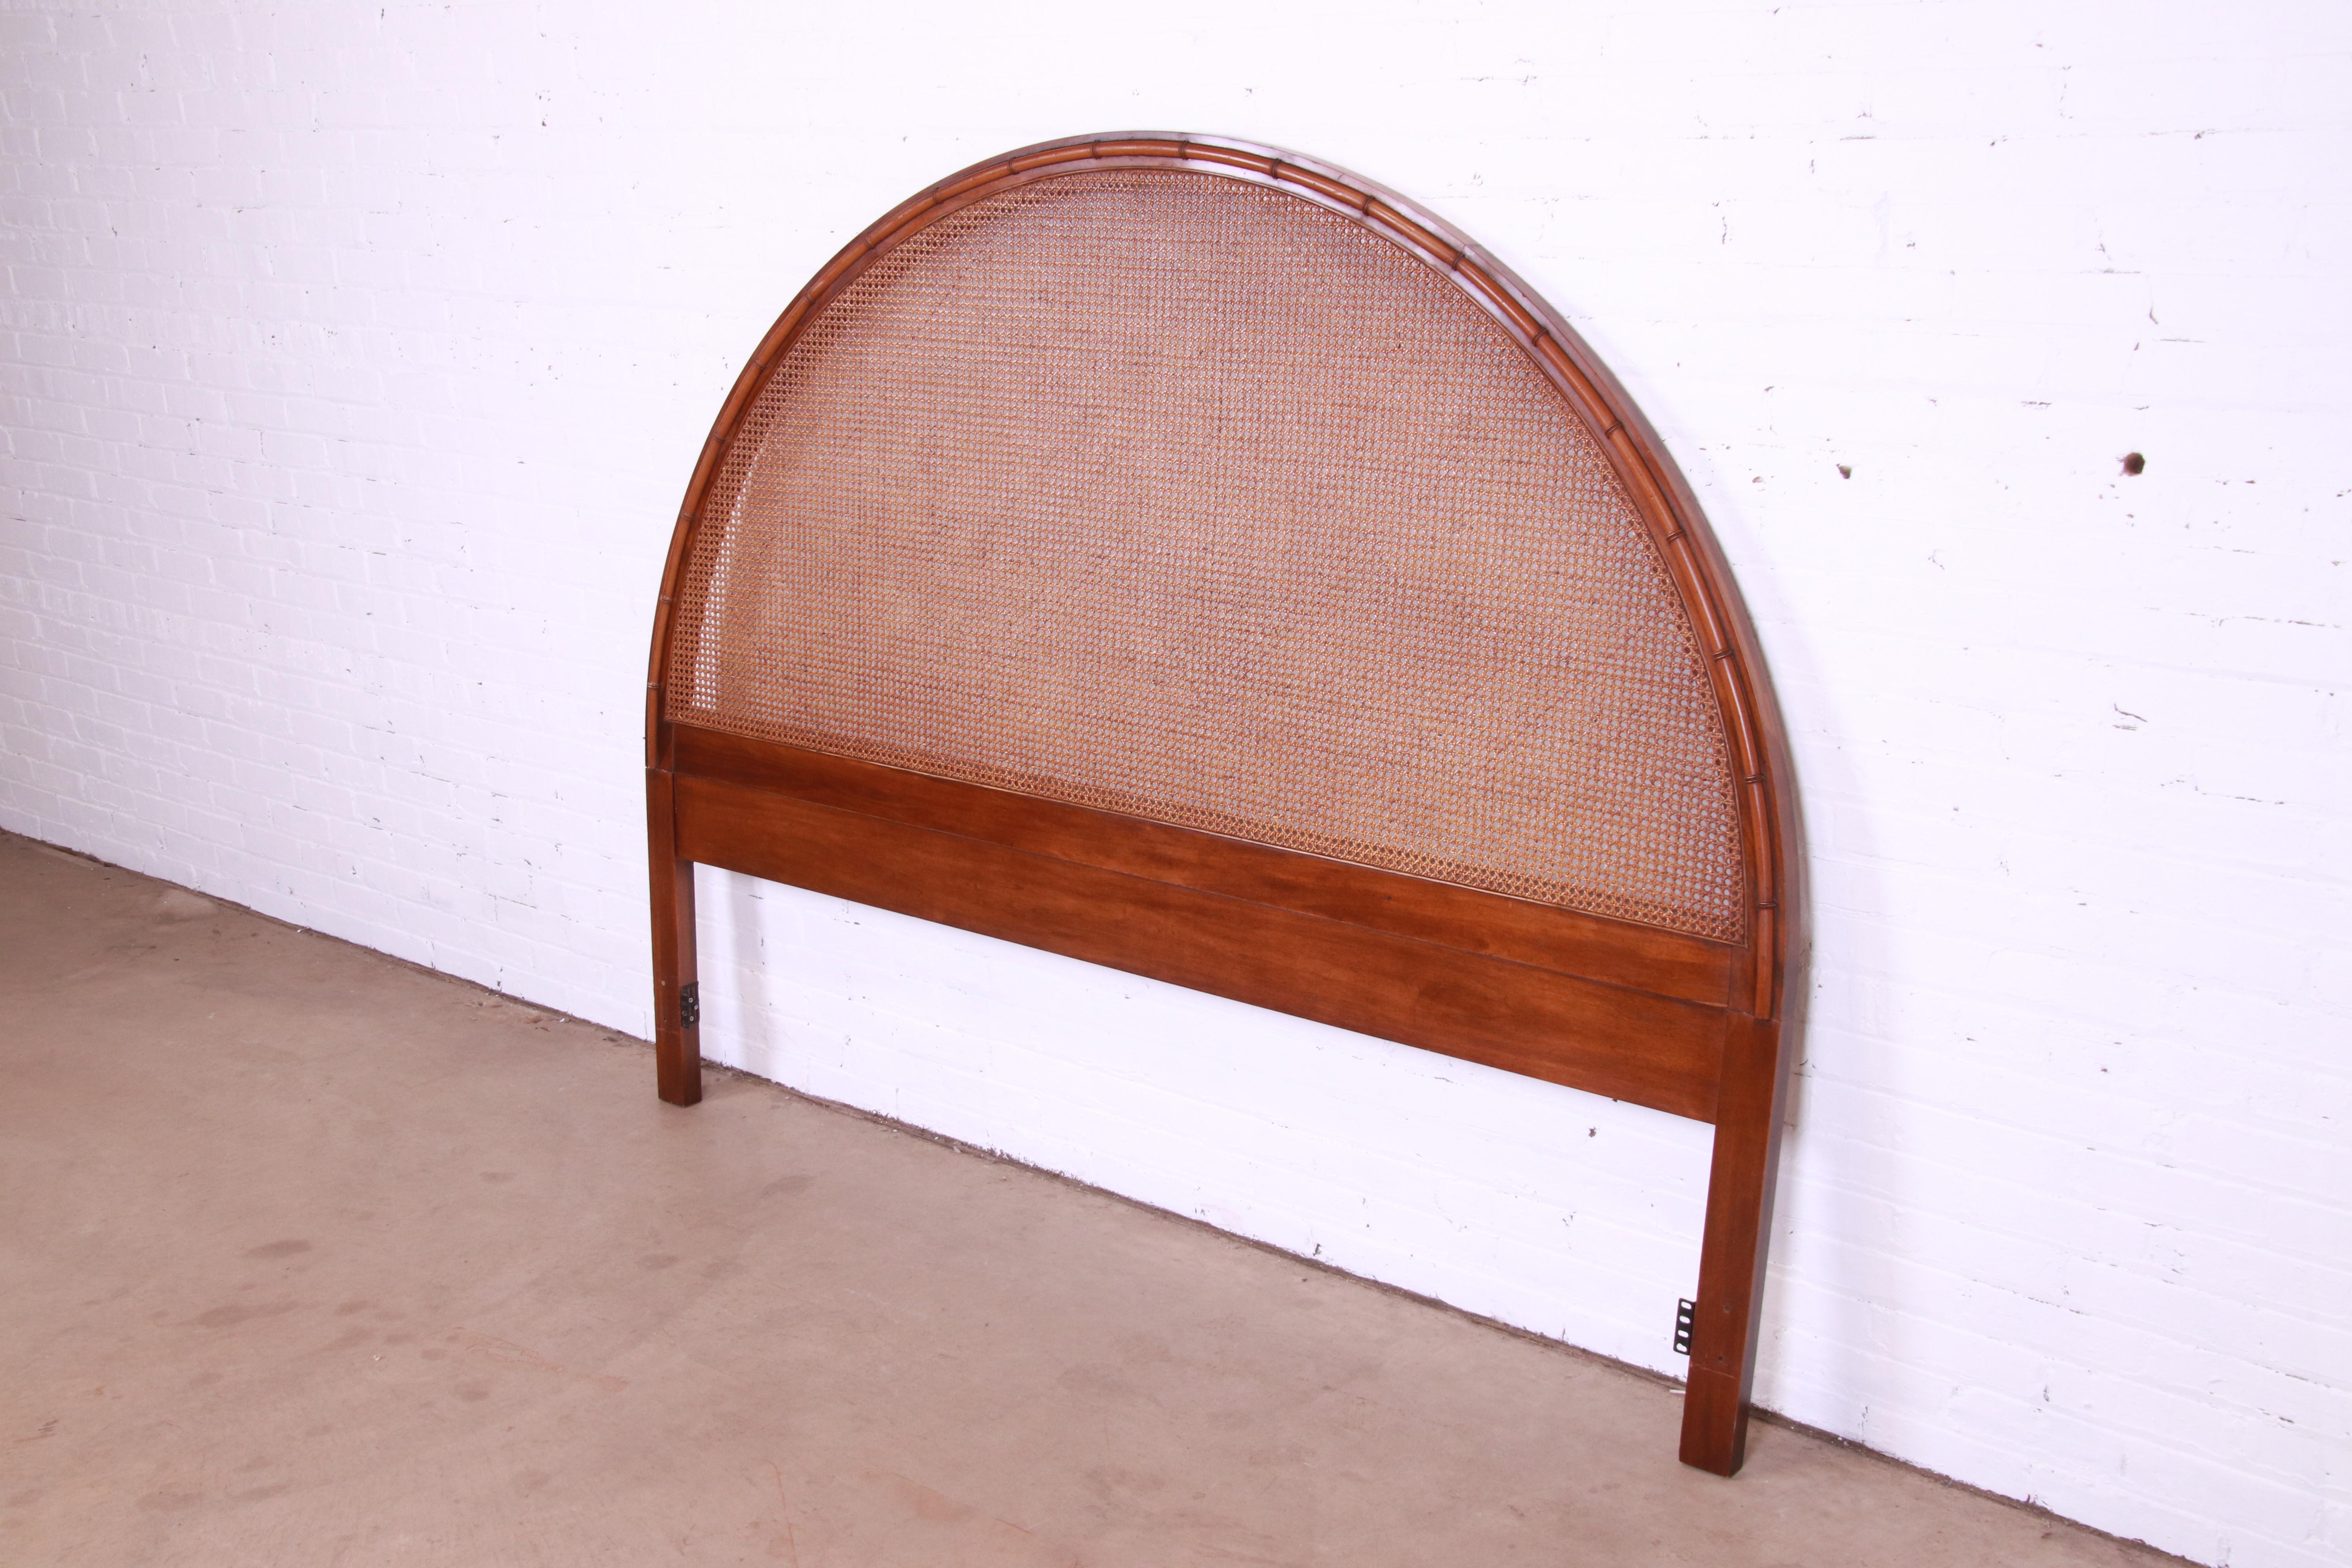 A gorgeous Mid-Century Modern Hollywood Regency king size headboard

USA, Circa 1960s

Walnut, cane, and faux bamboo in dramatic arched form.

Measures: 80